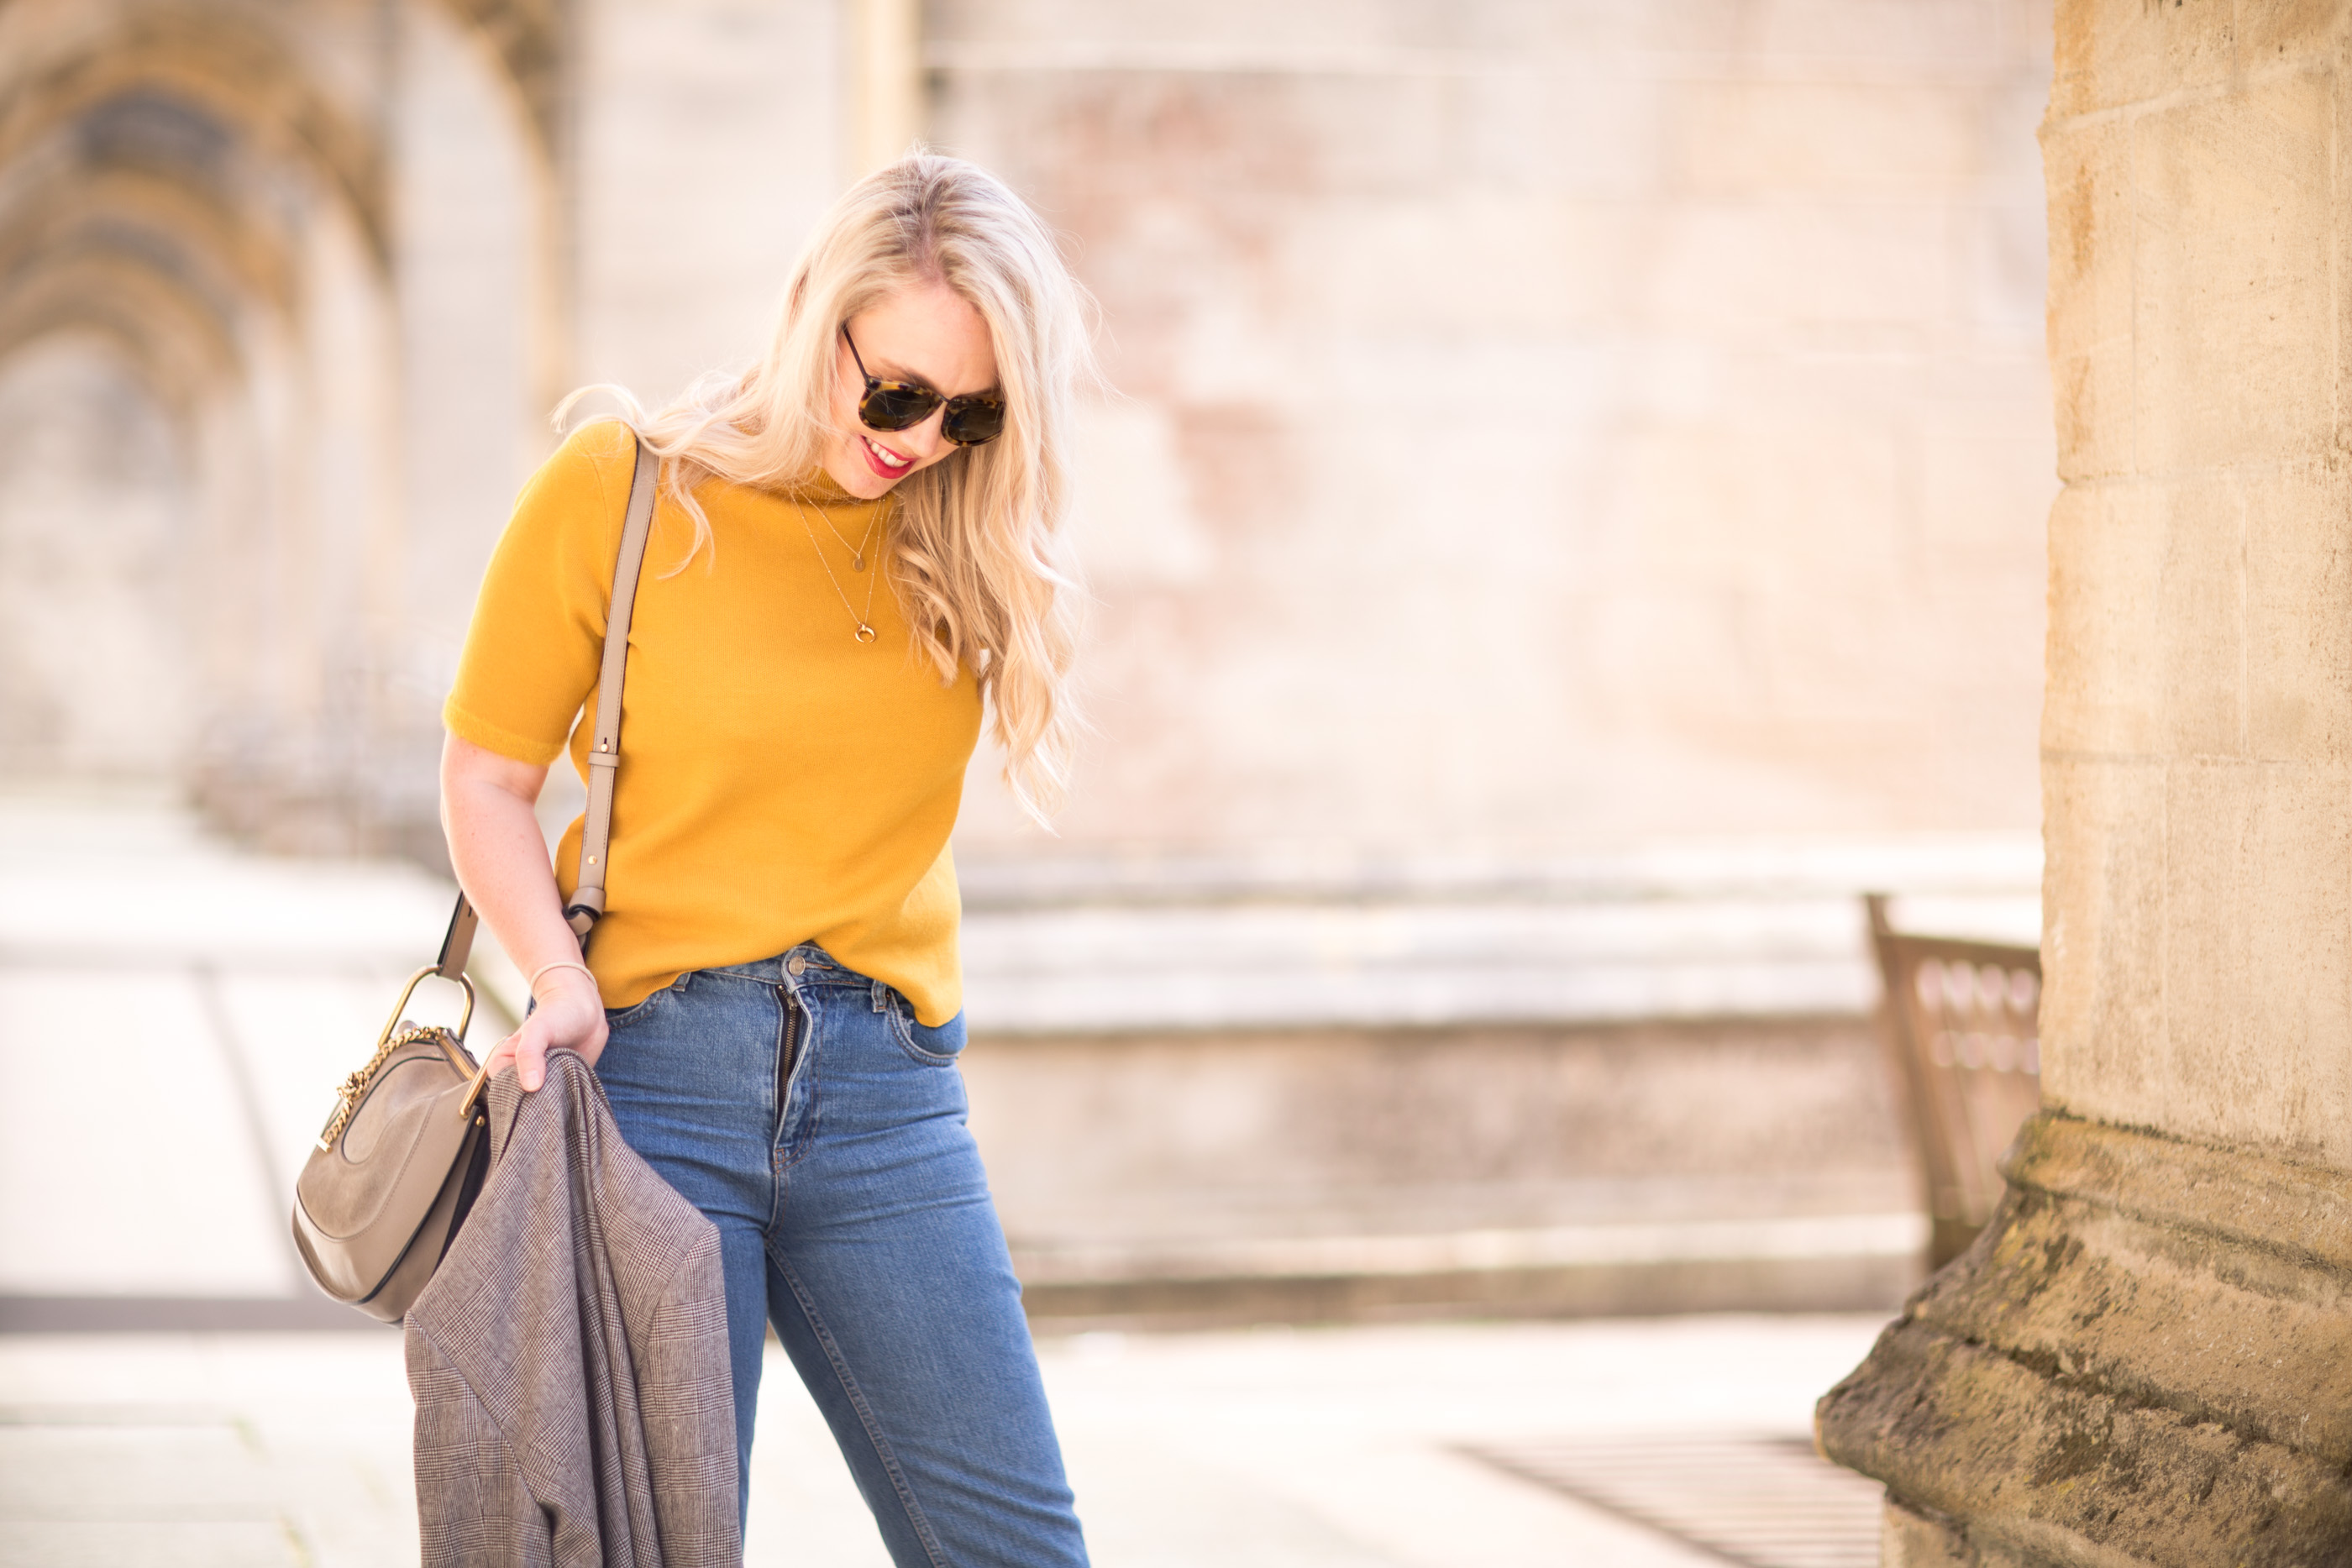 outfits with mustard yellow shirt